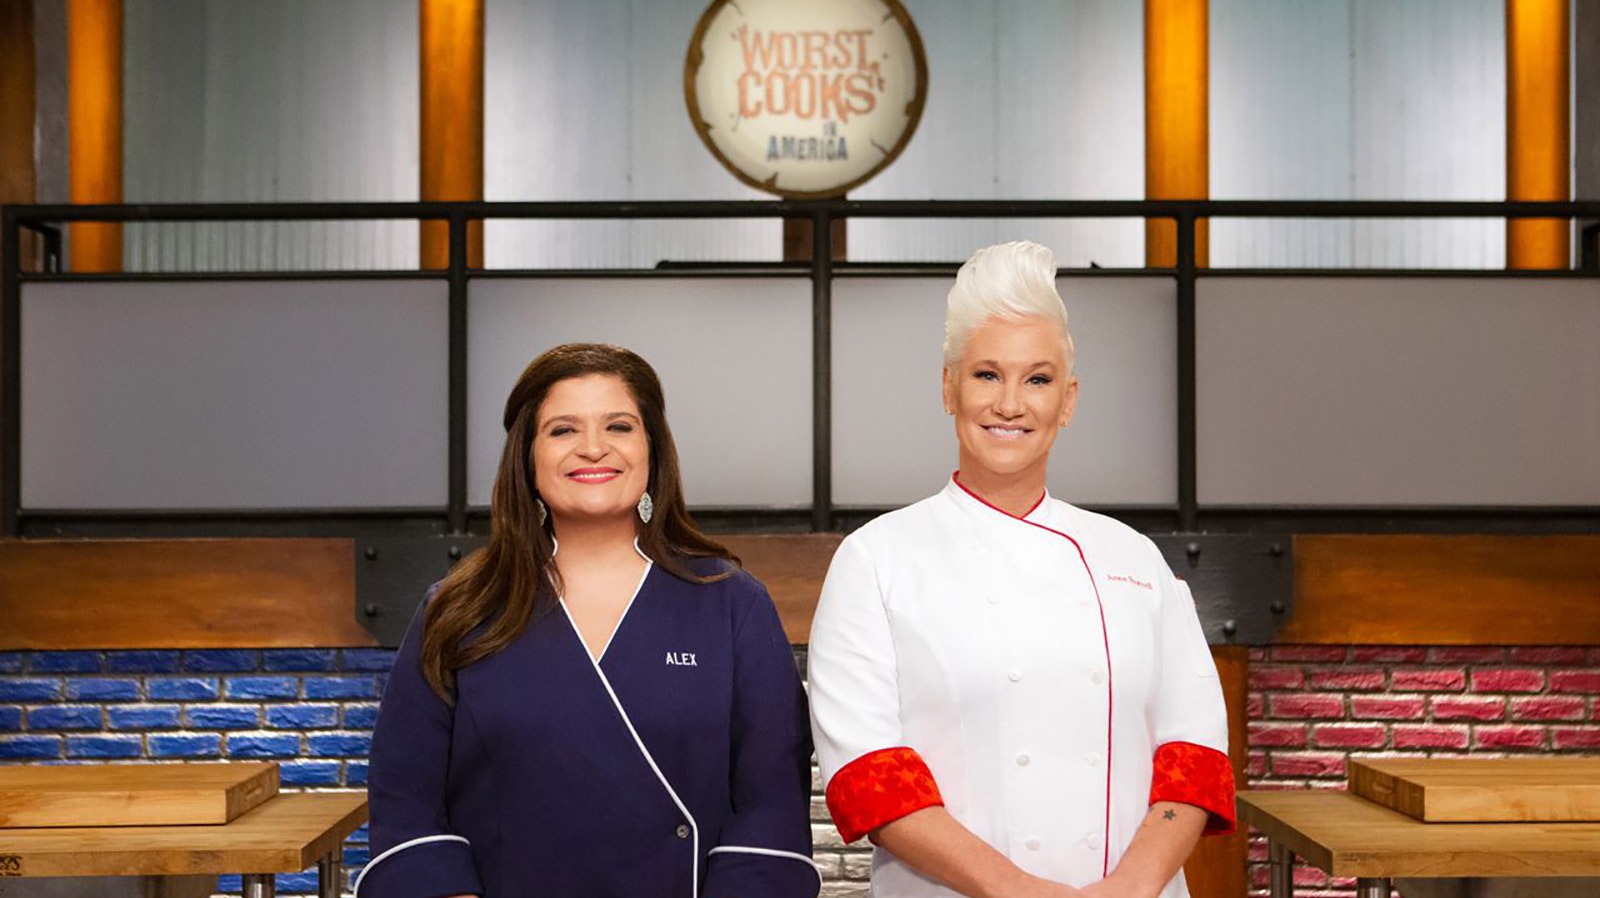 The Truth About The Worst Cooks In America